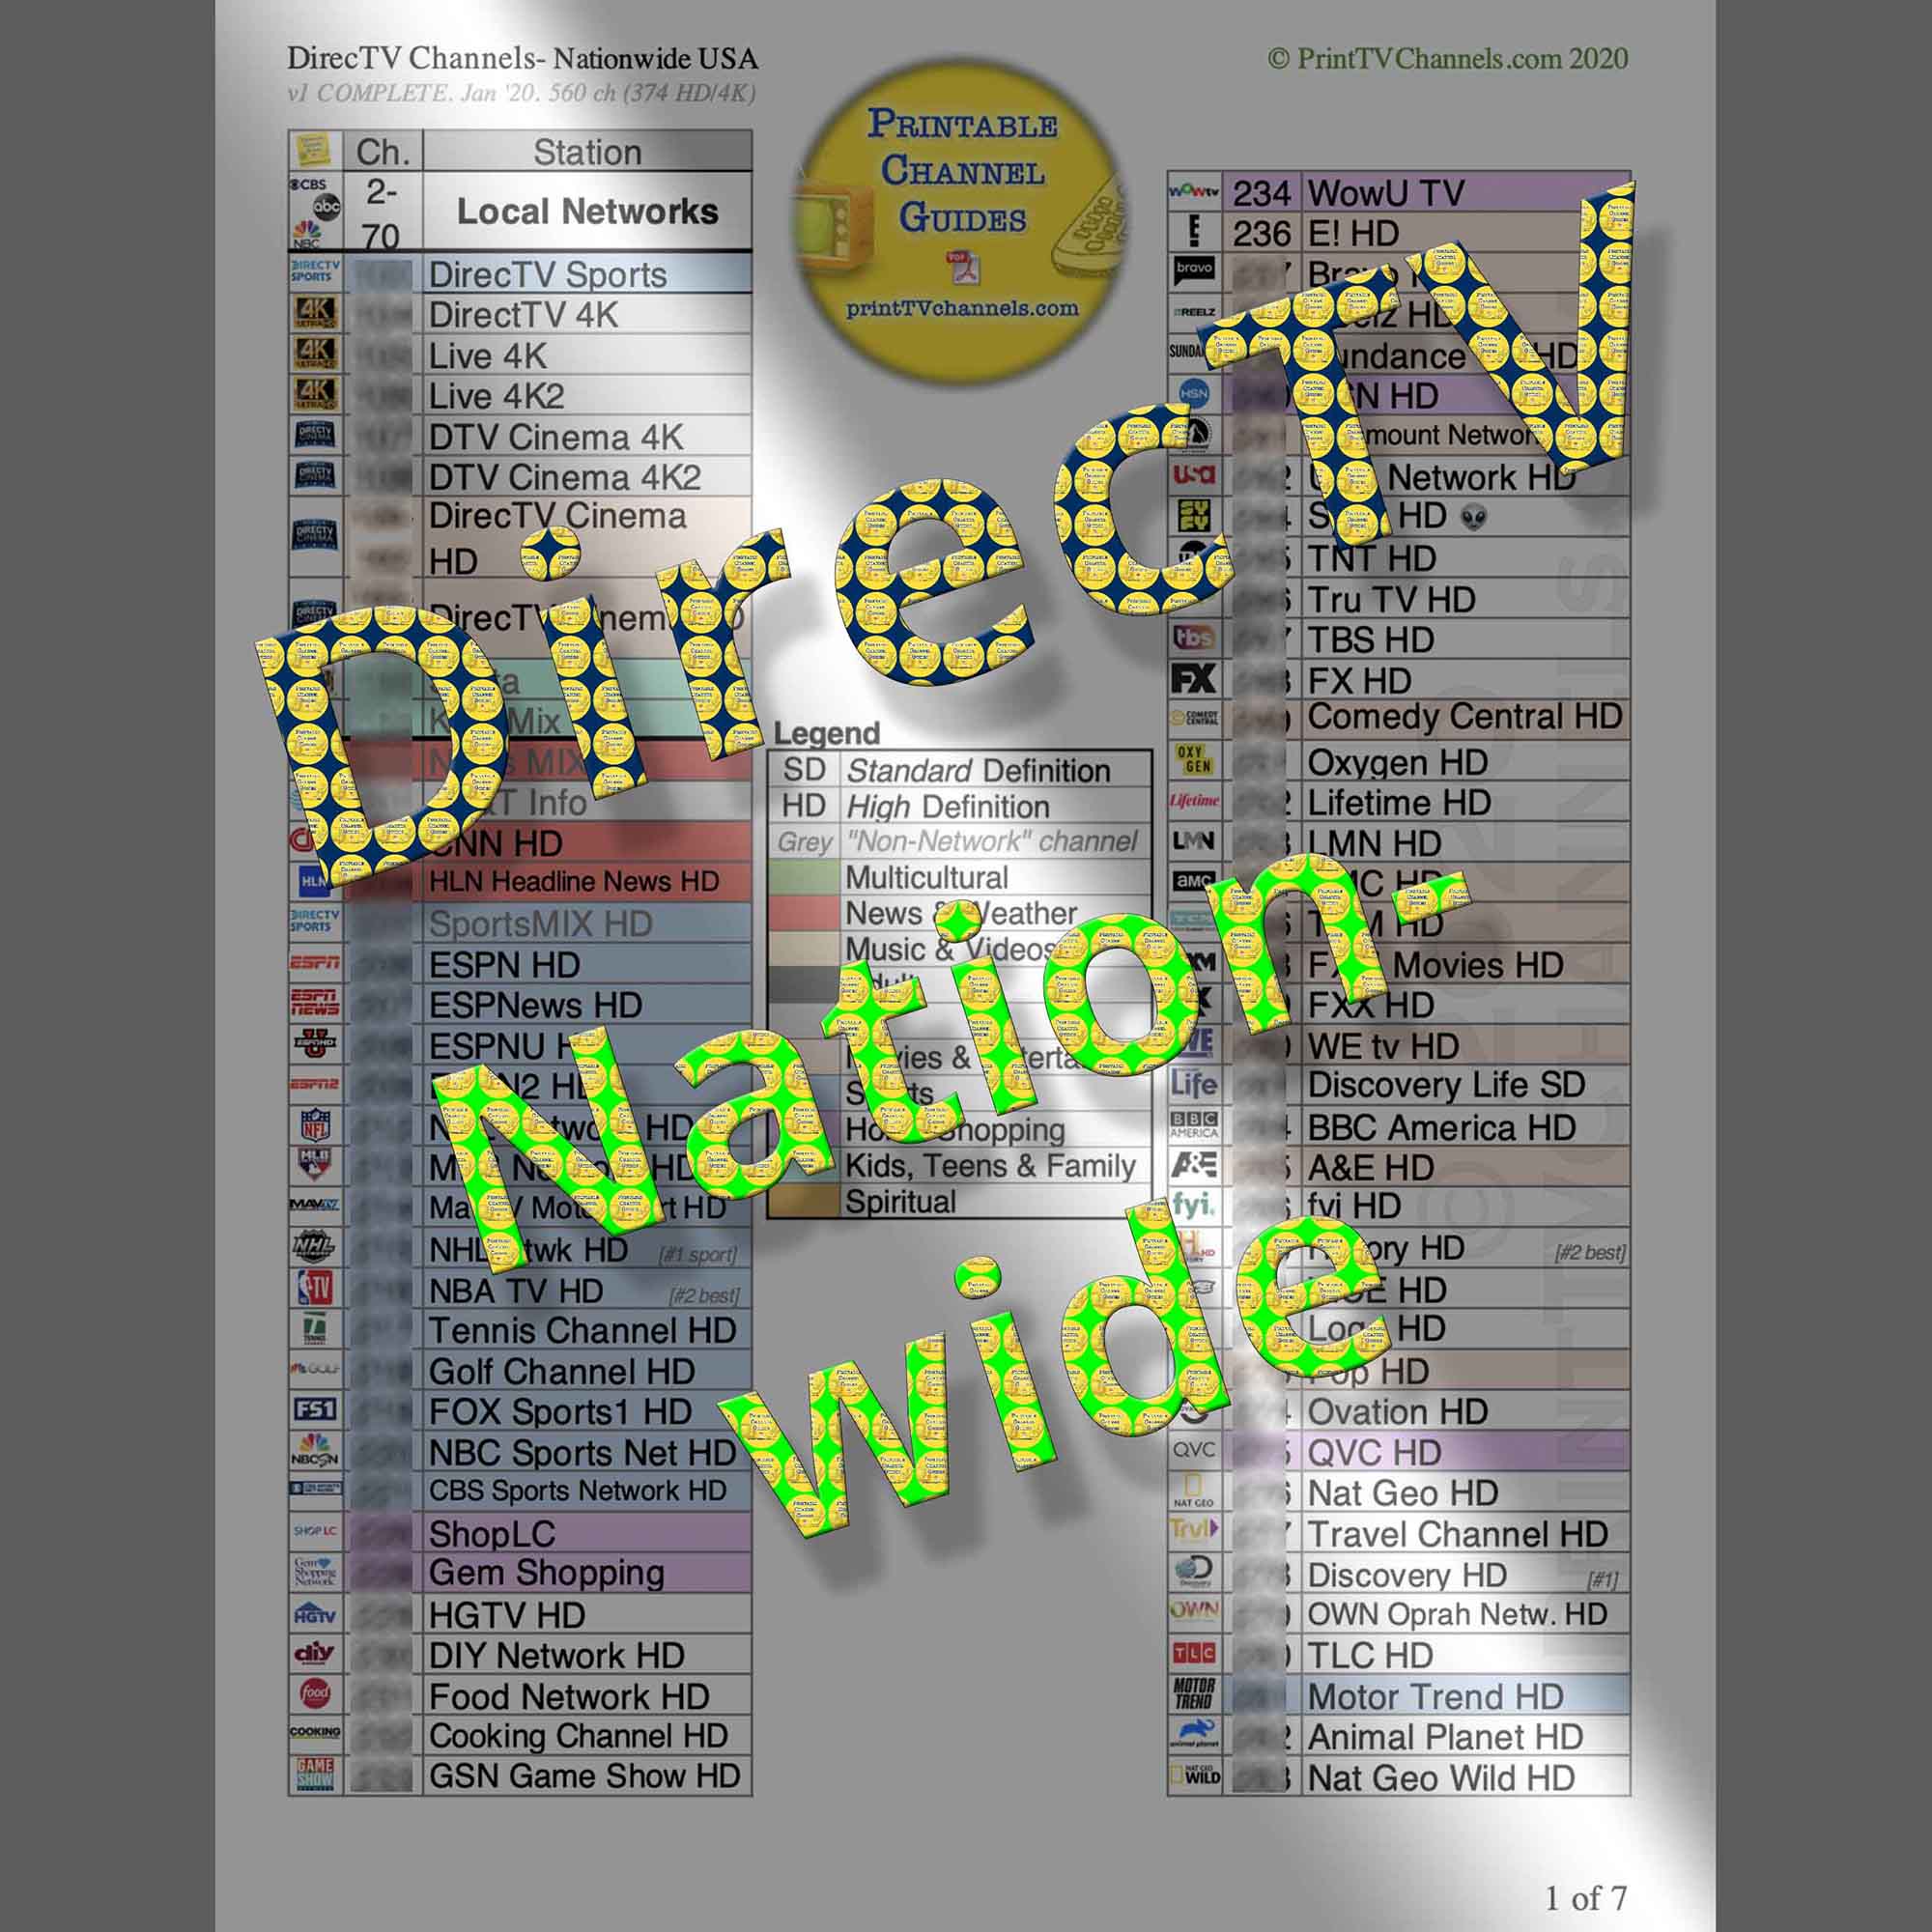 DirecTV Channel Guide | Nationwide | Complete Version